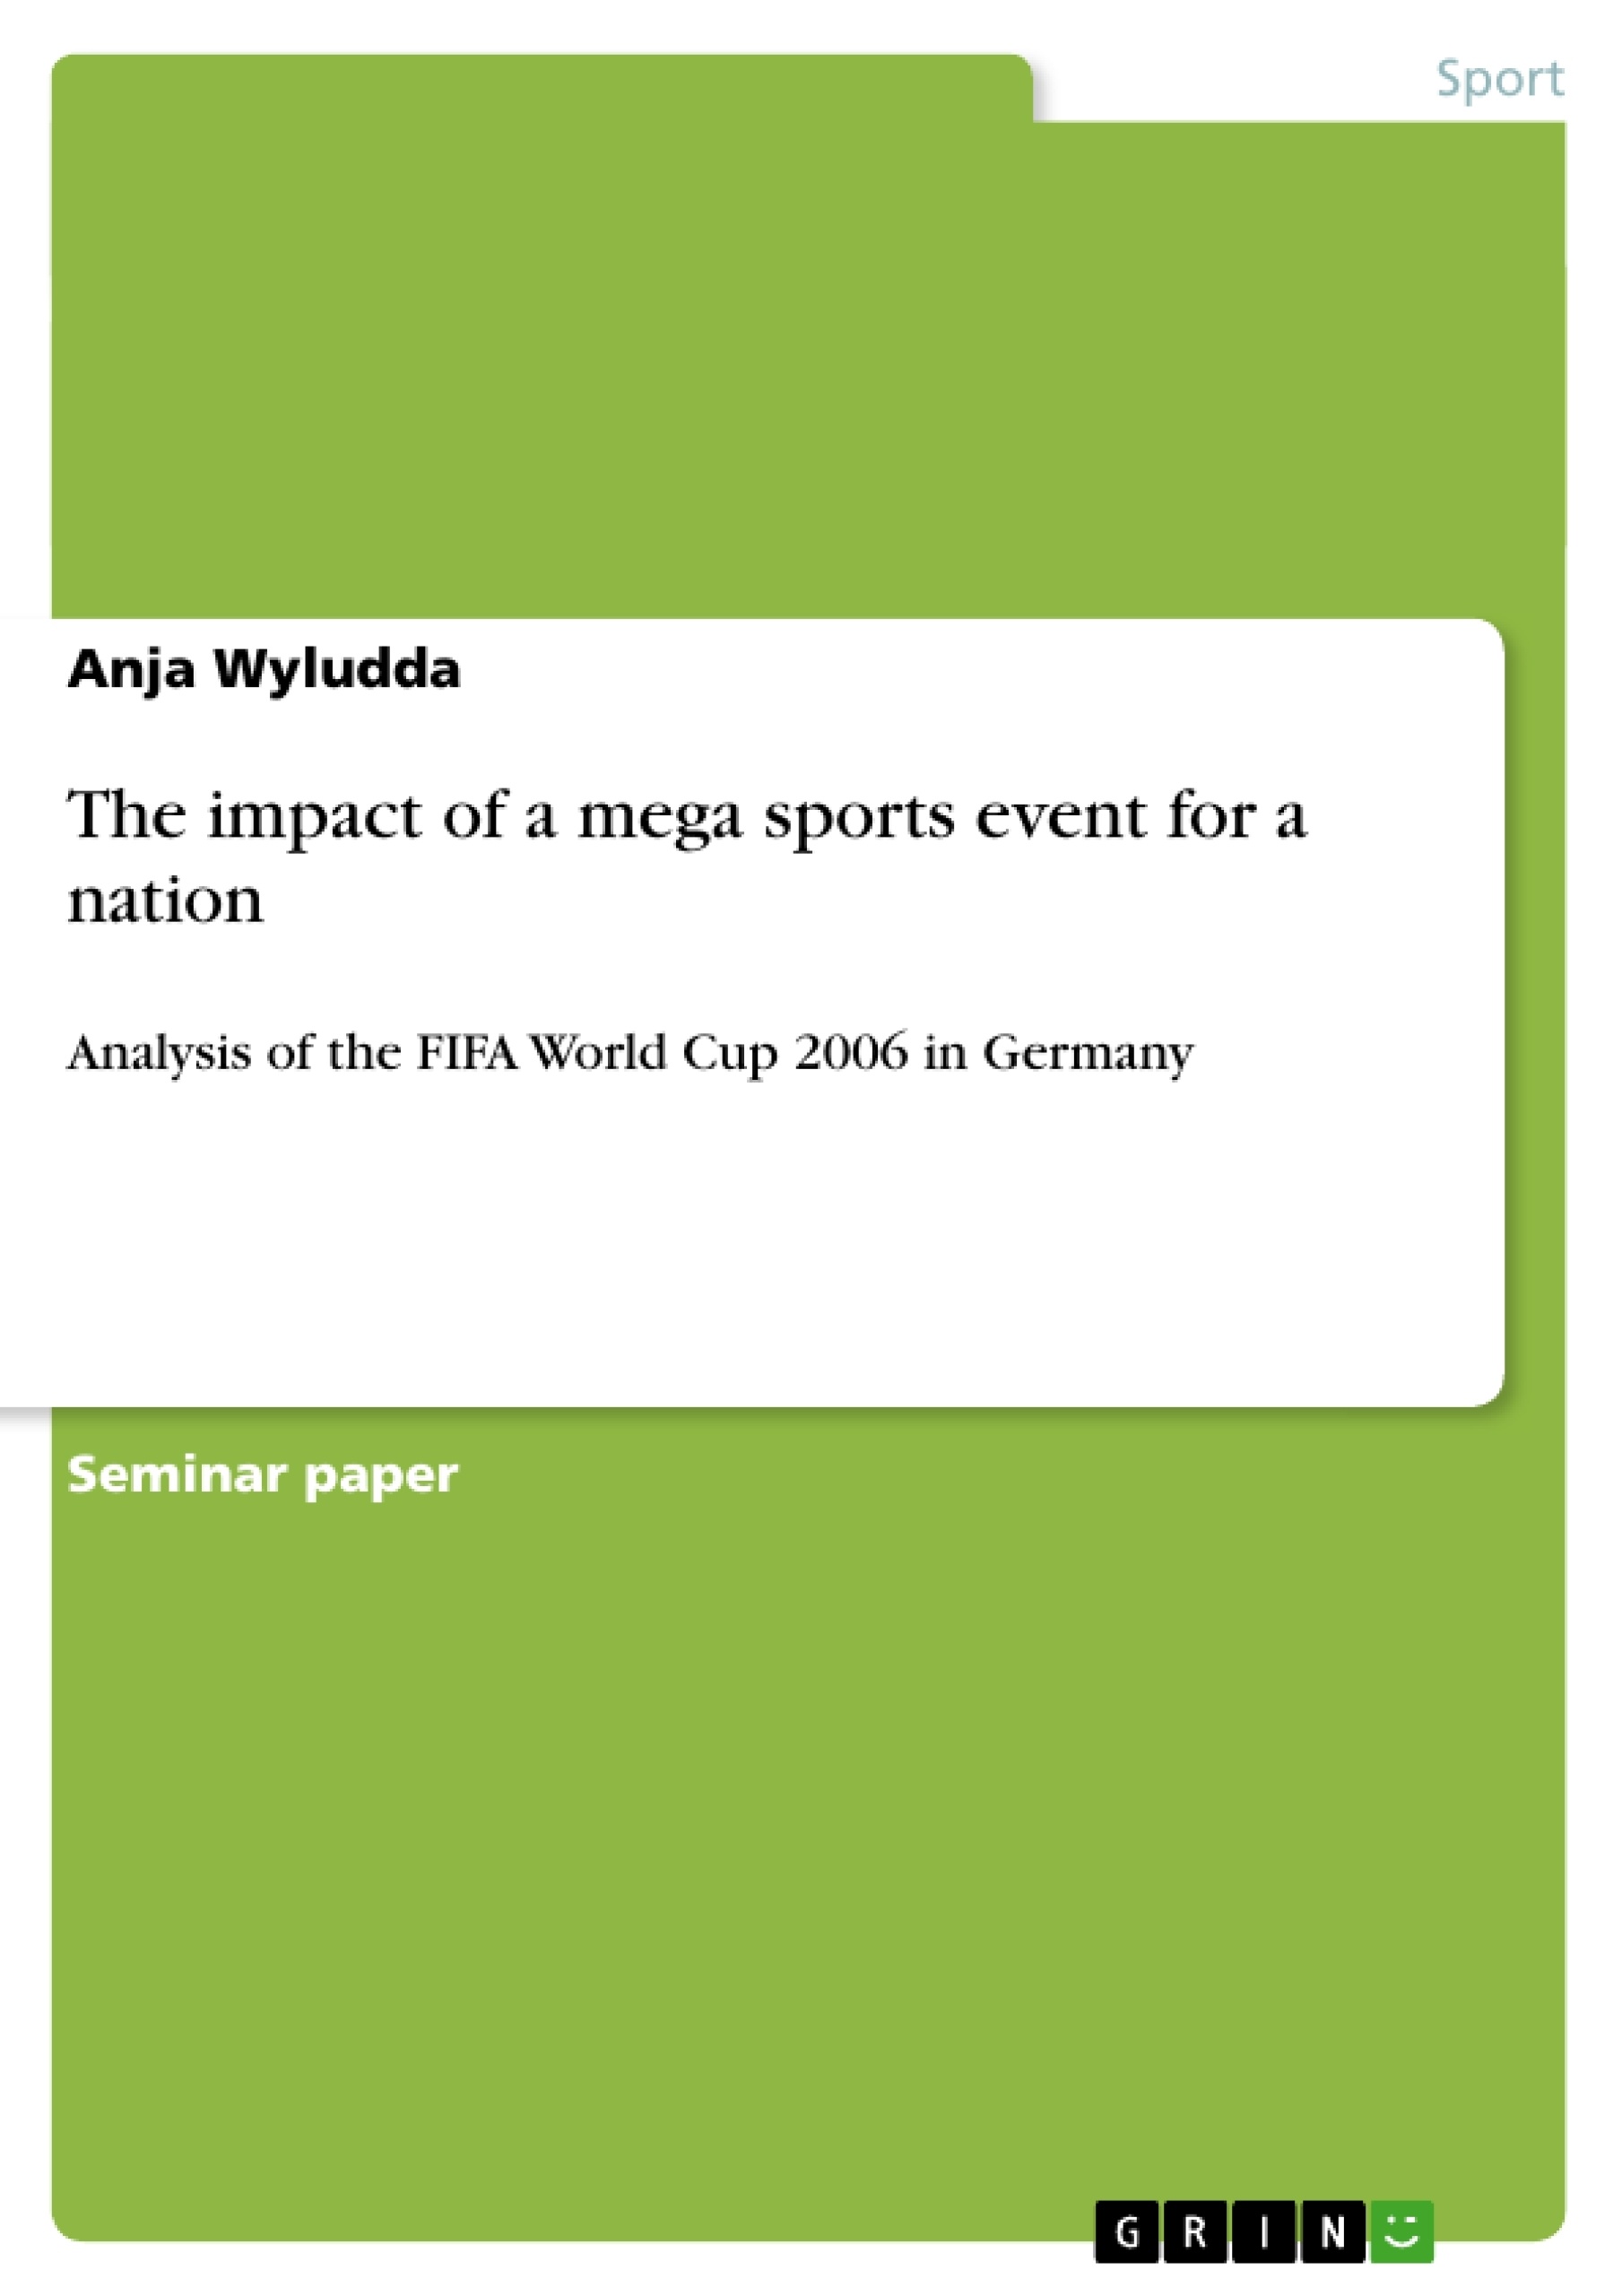 Titre: The impact of a mega sports event for a nation